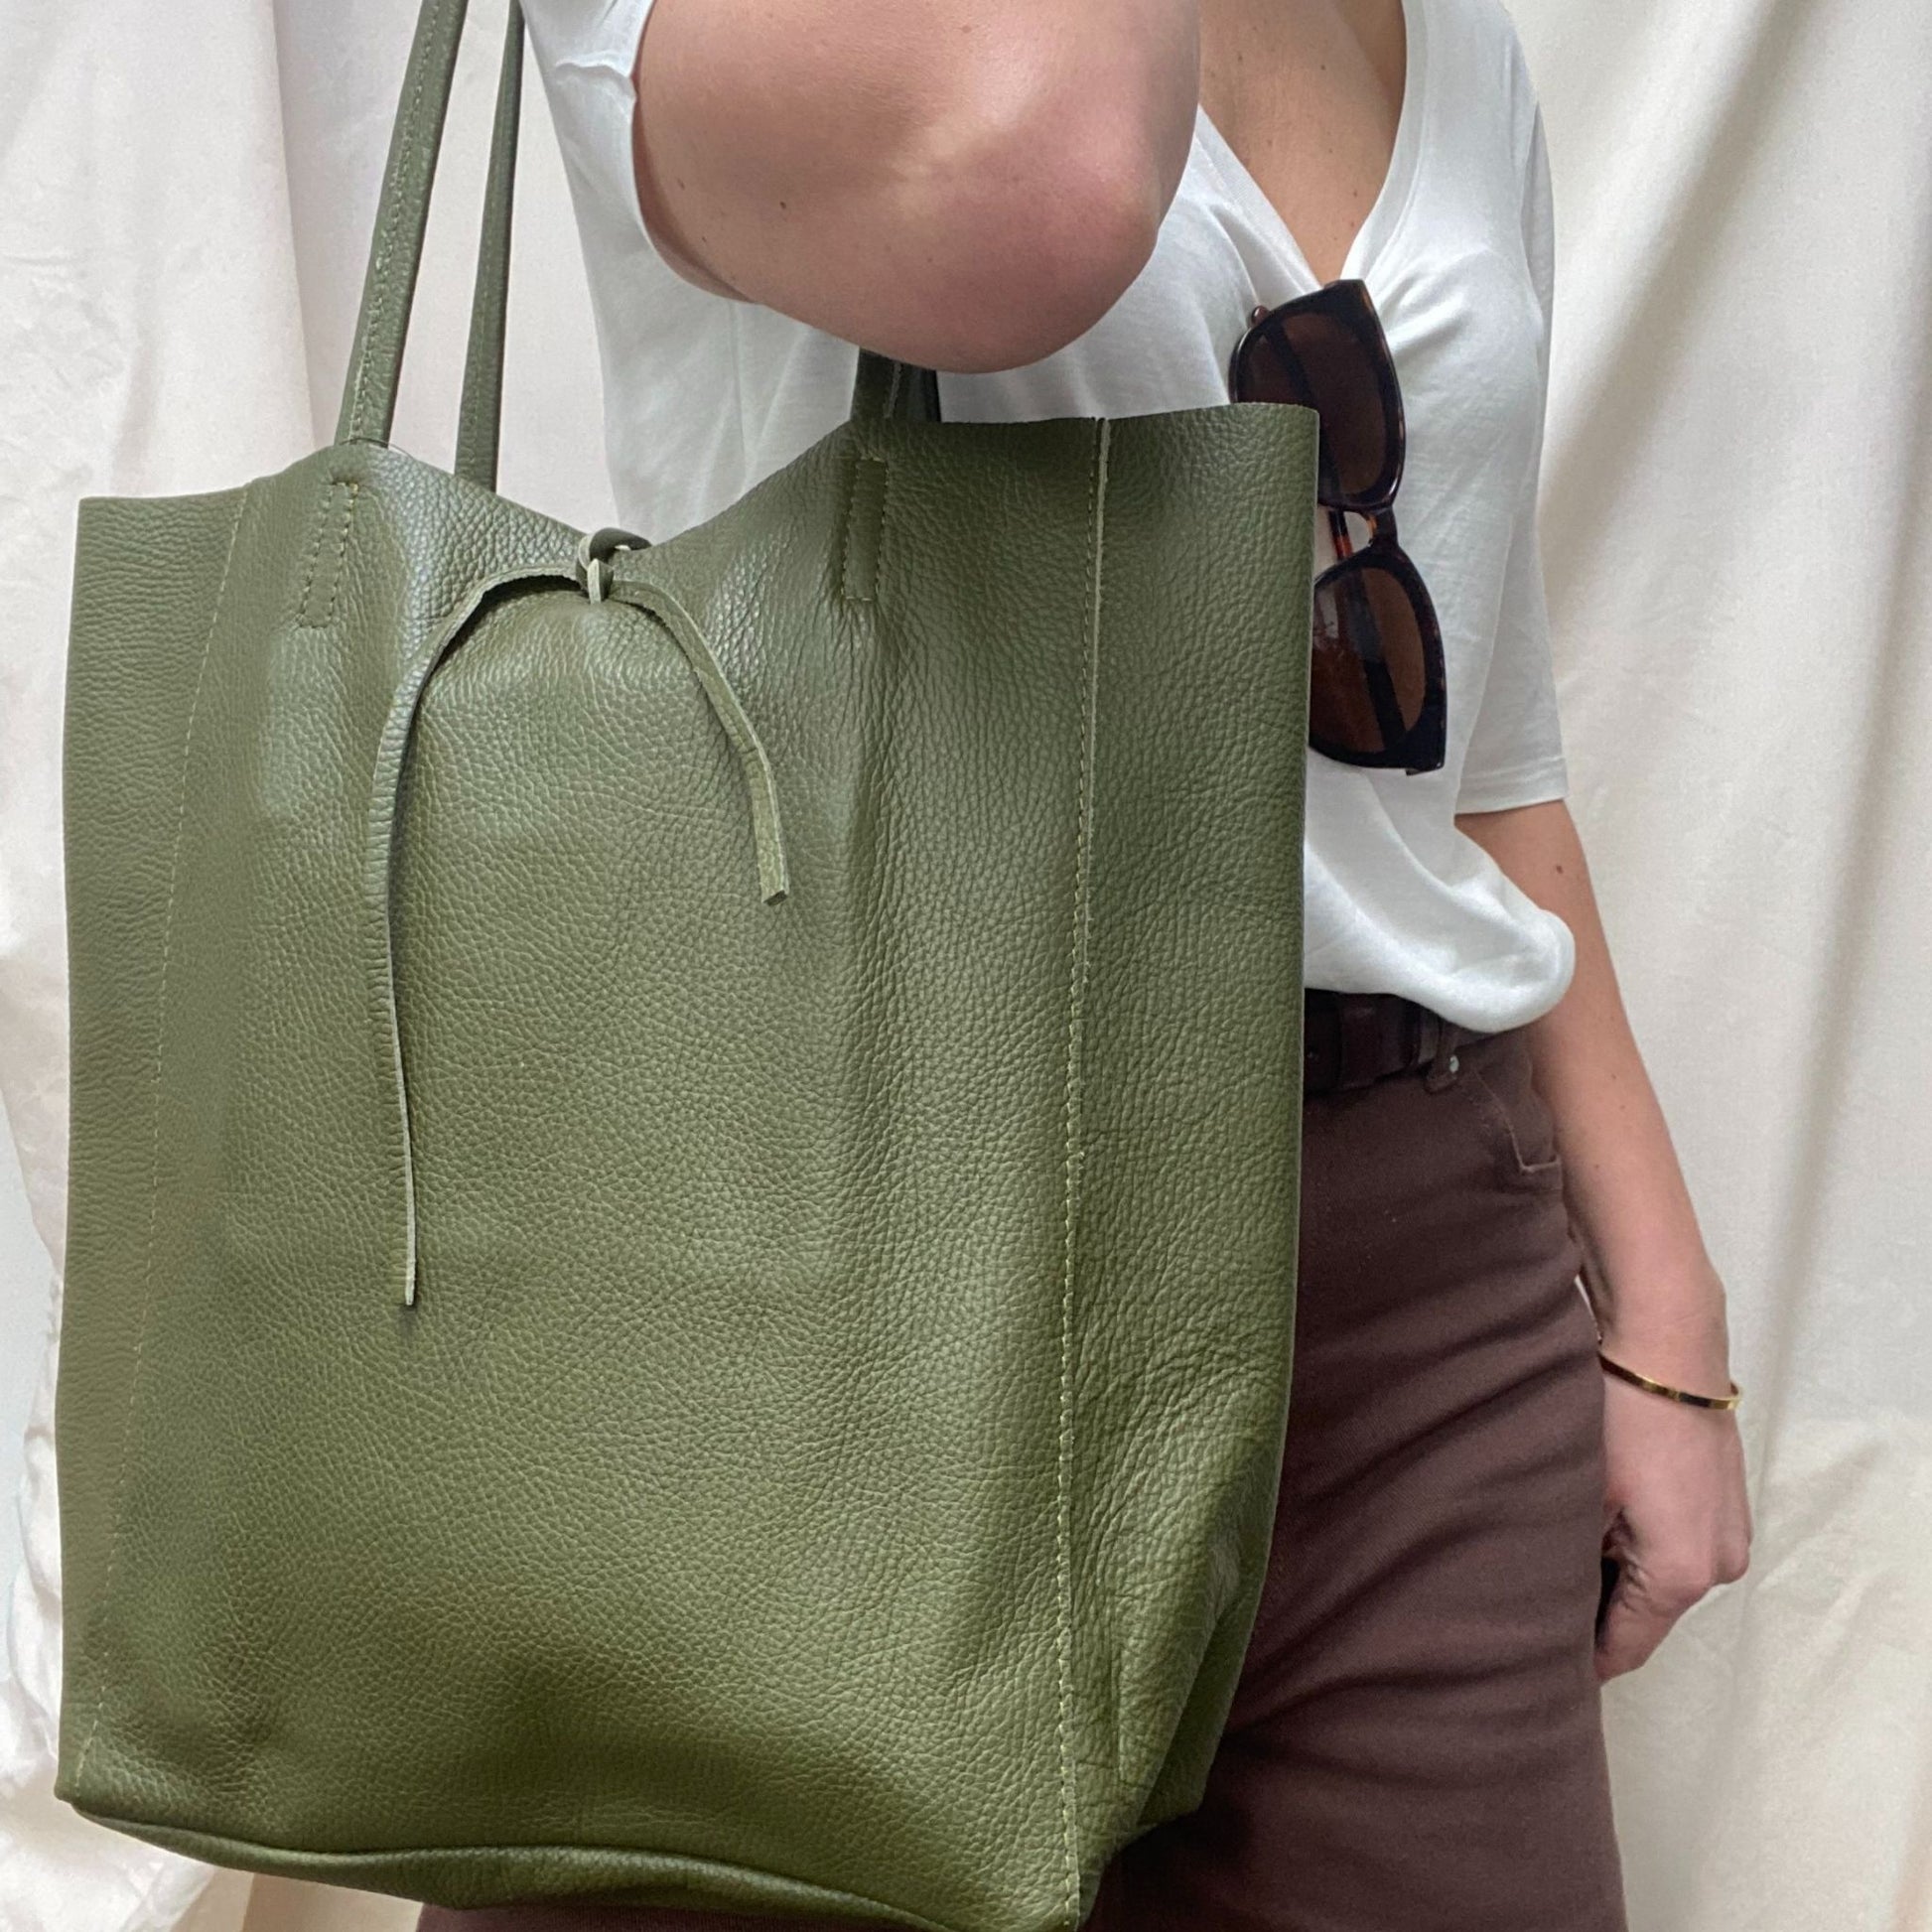 Lady holding green leather bag side view